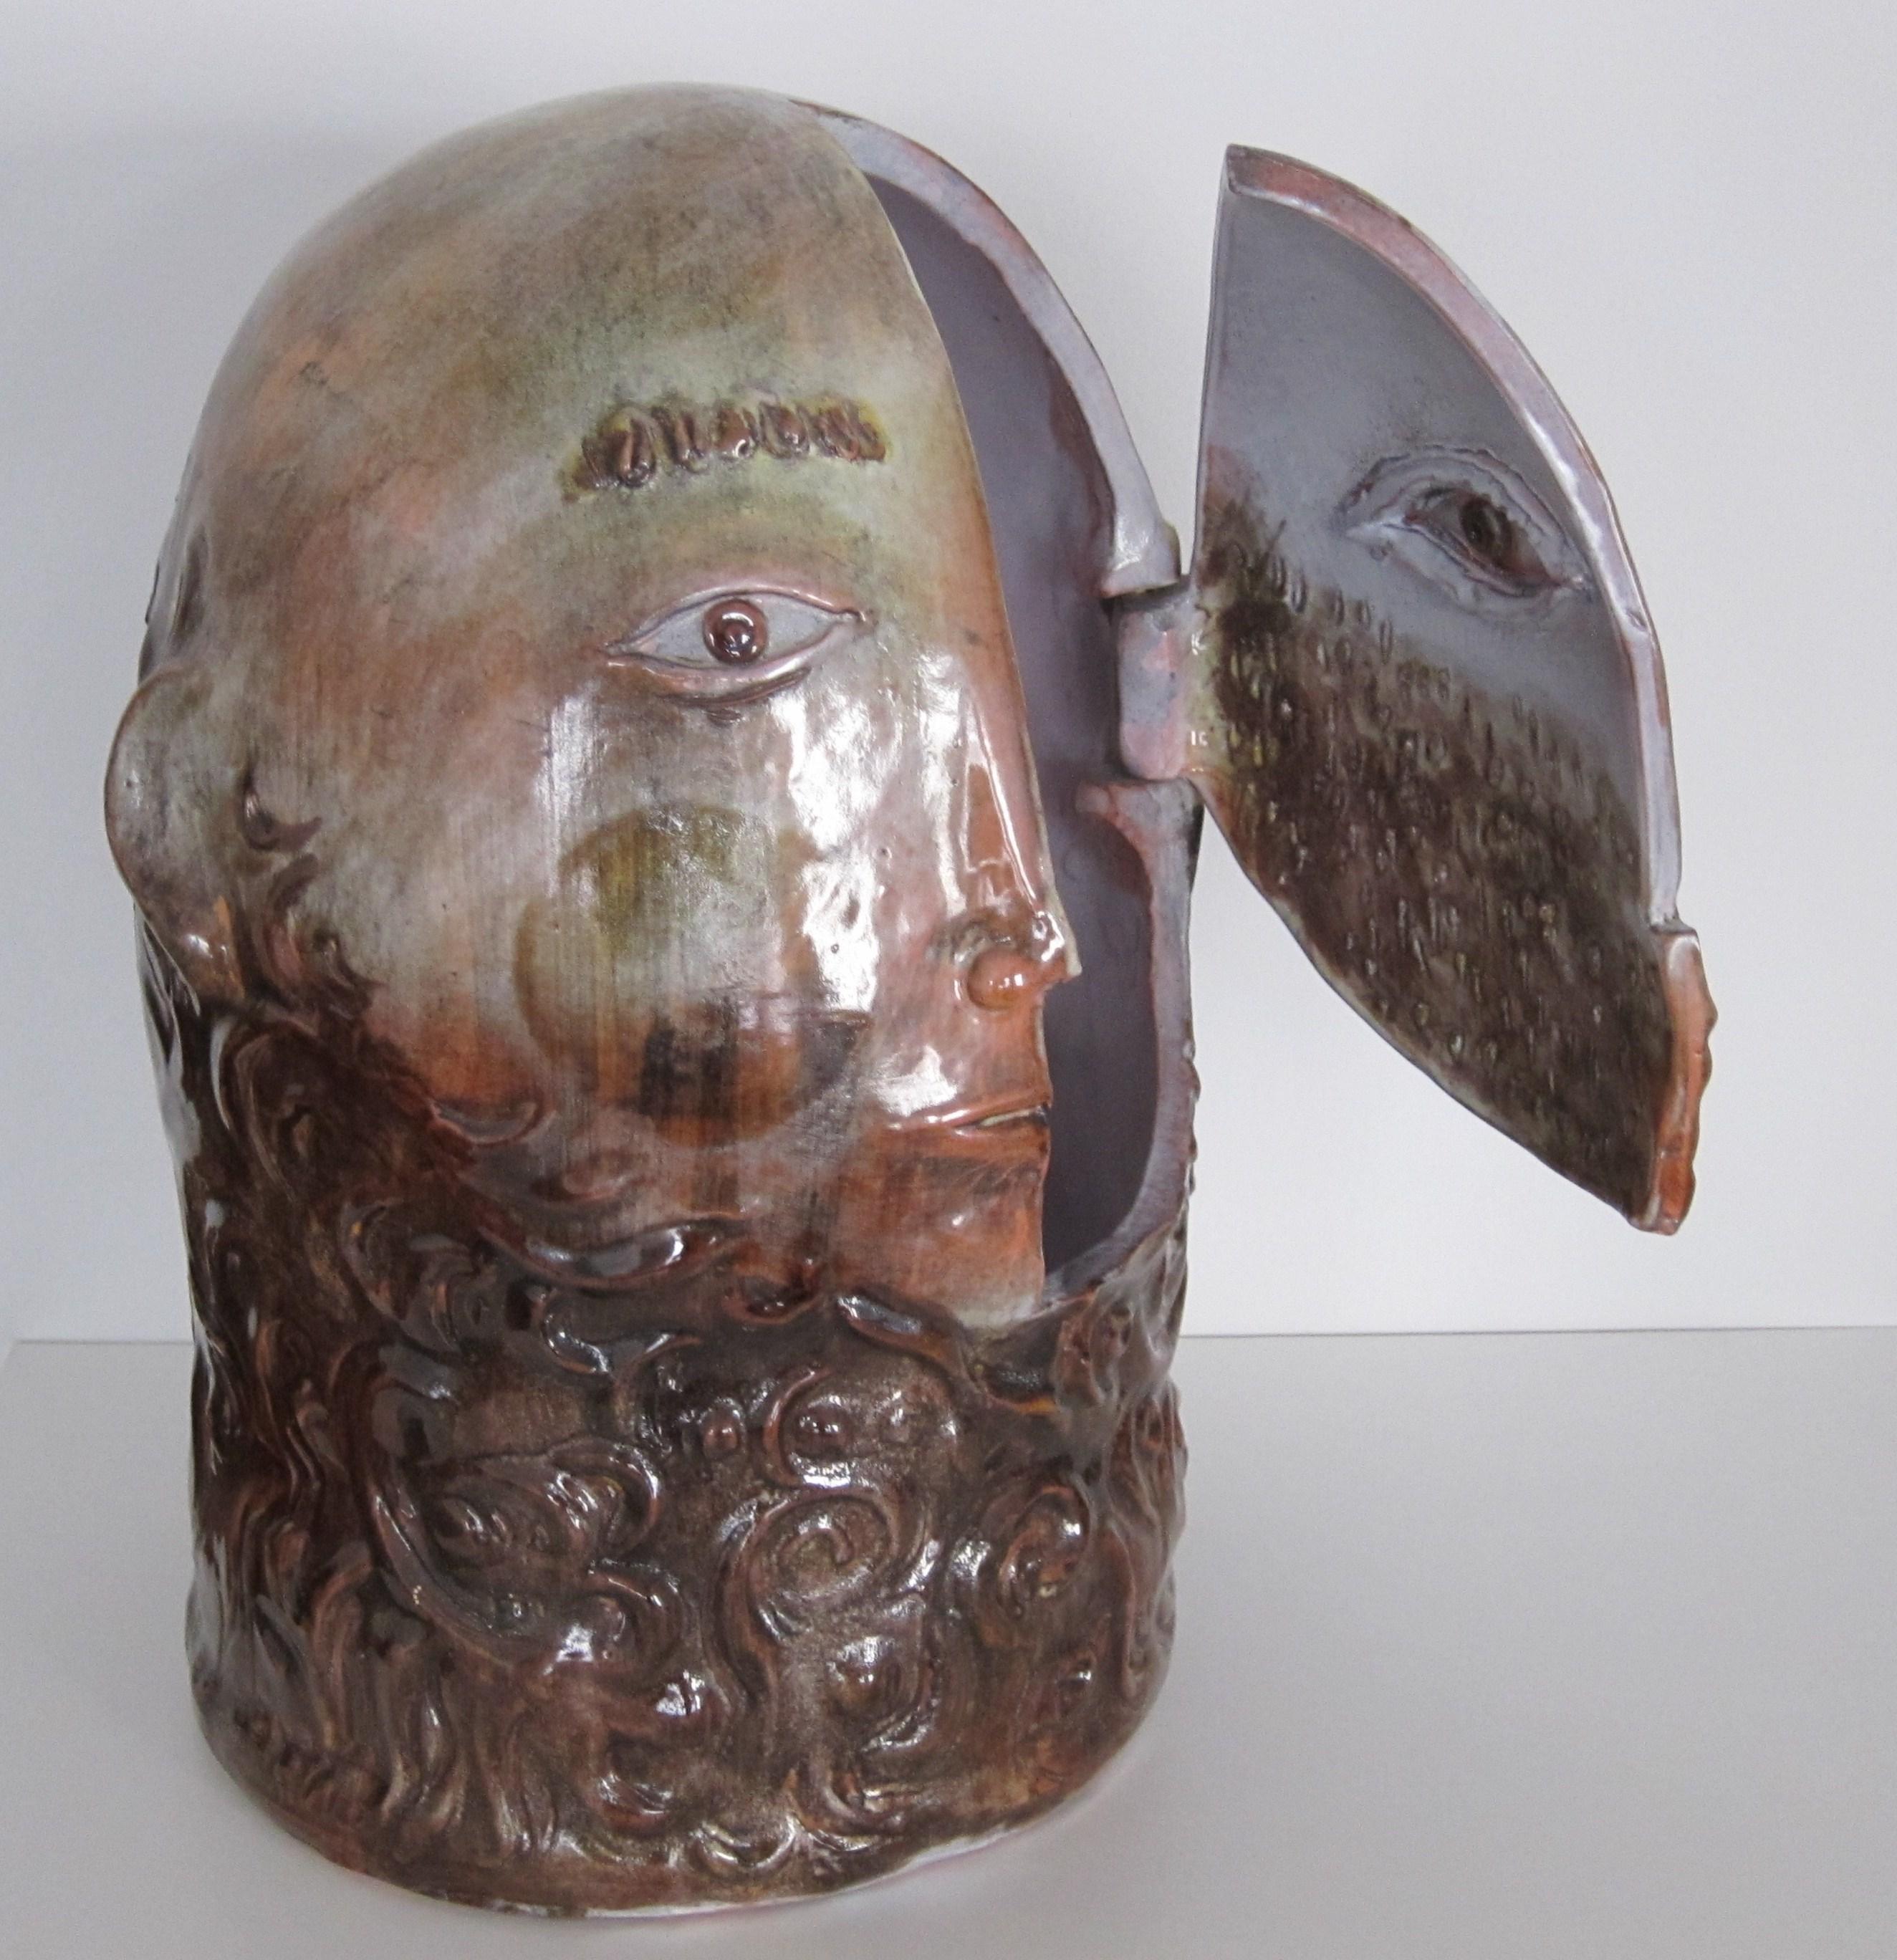 French Rare Ceramic Head as a Box, by Cloutier Brothers, 1959 For Sale